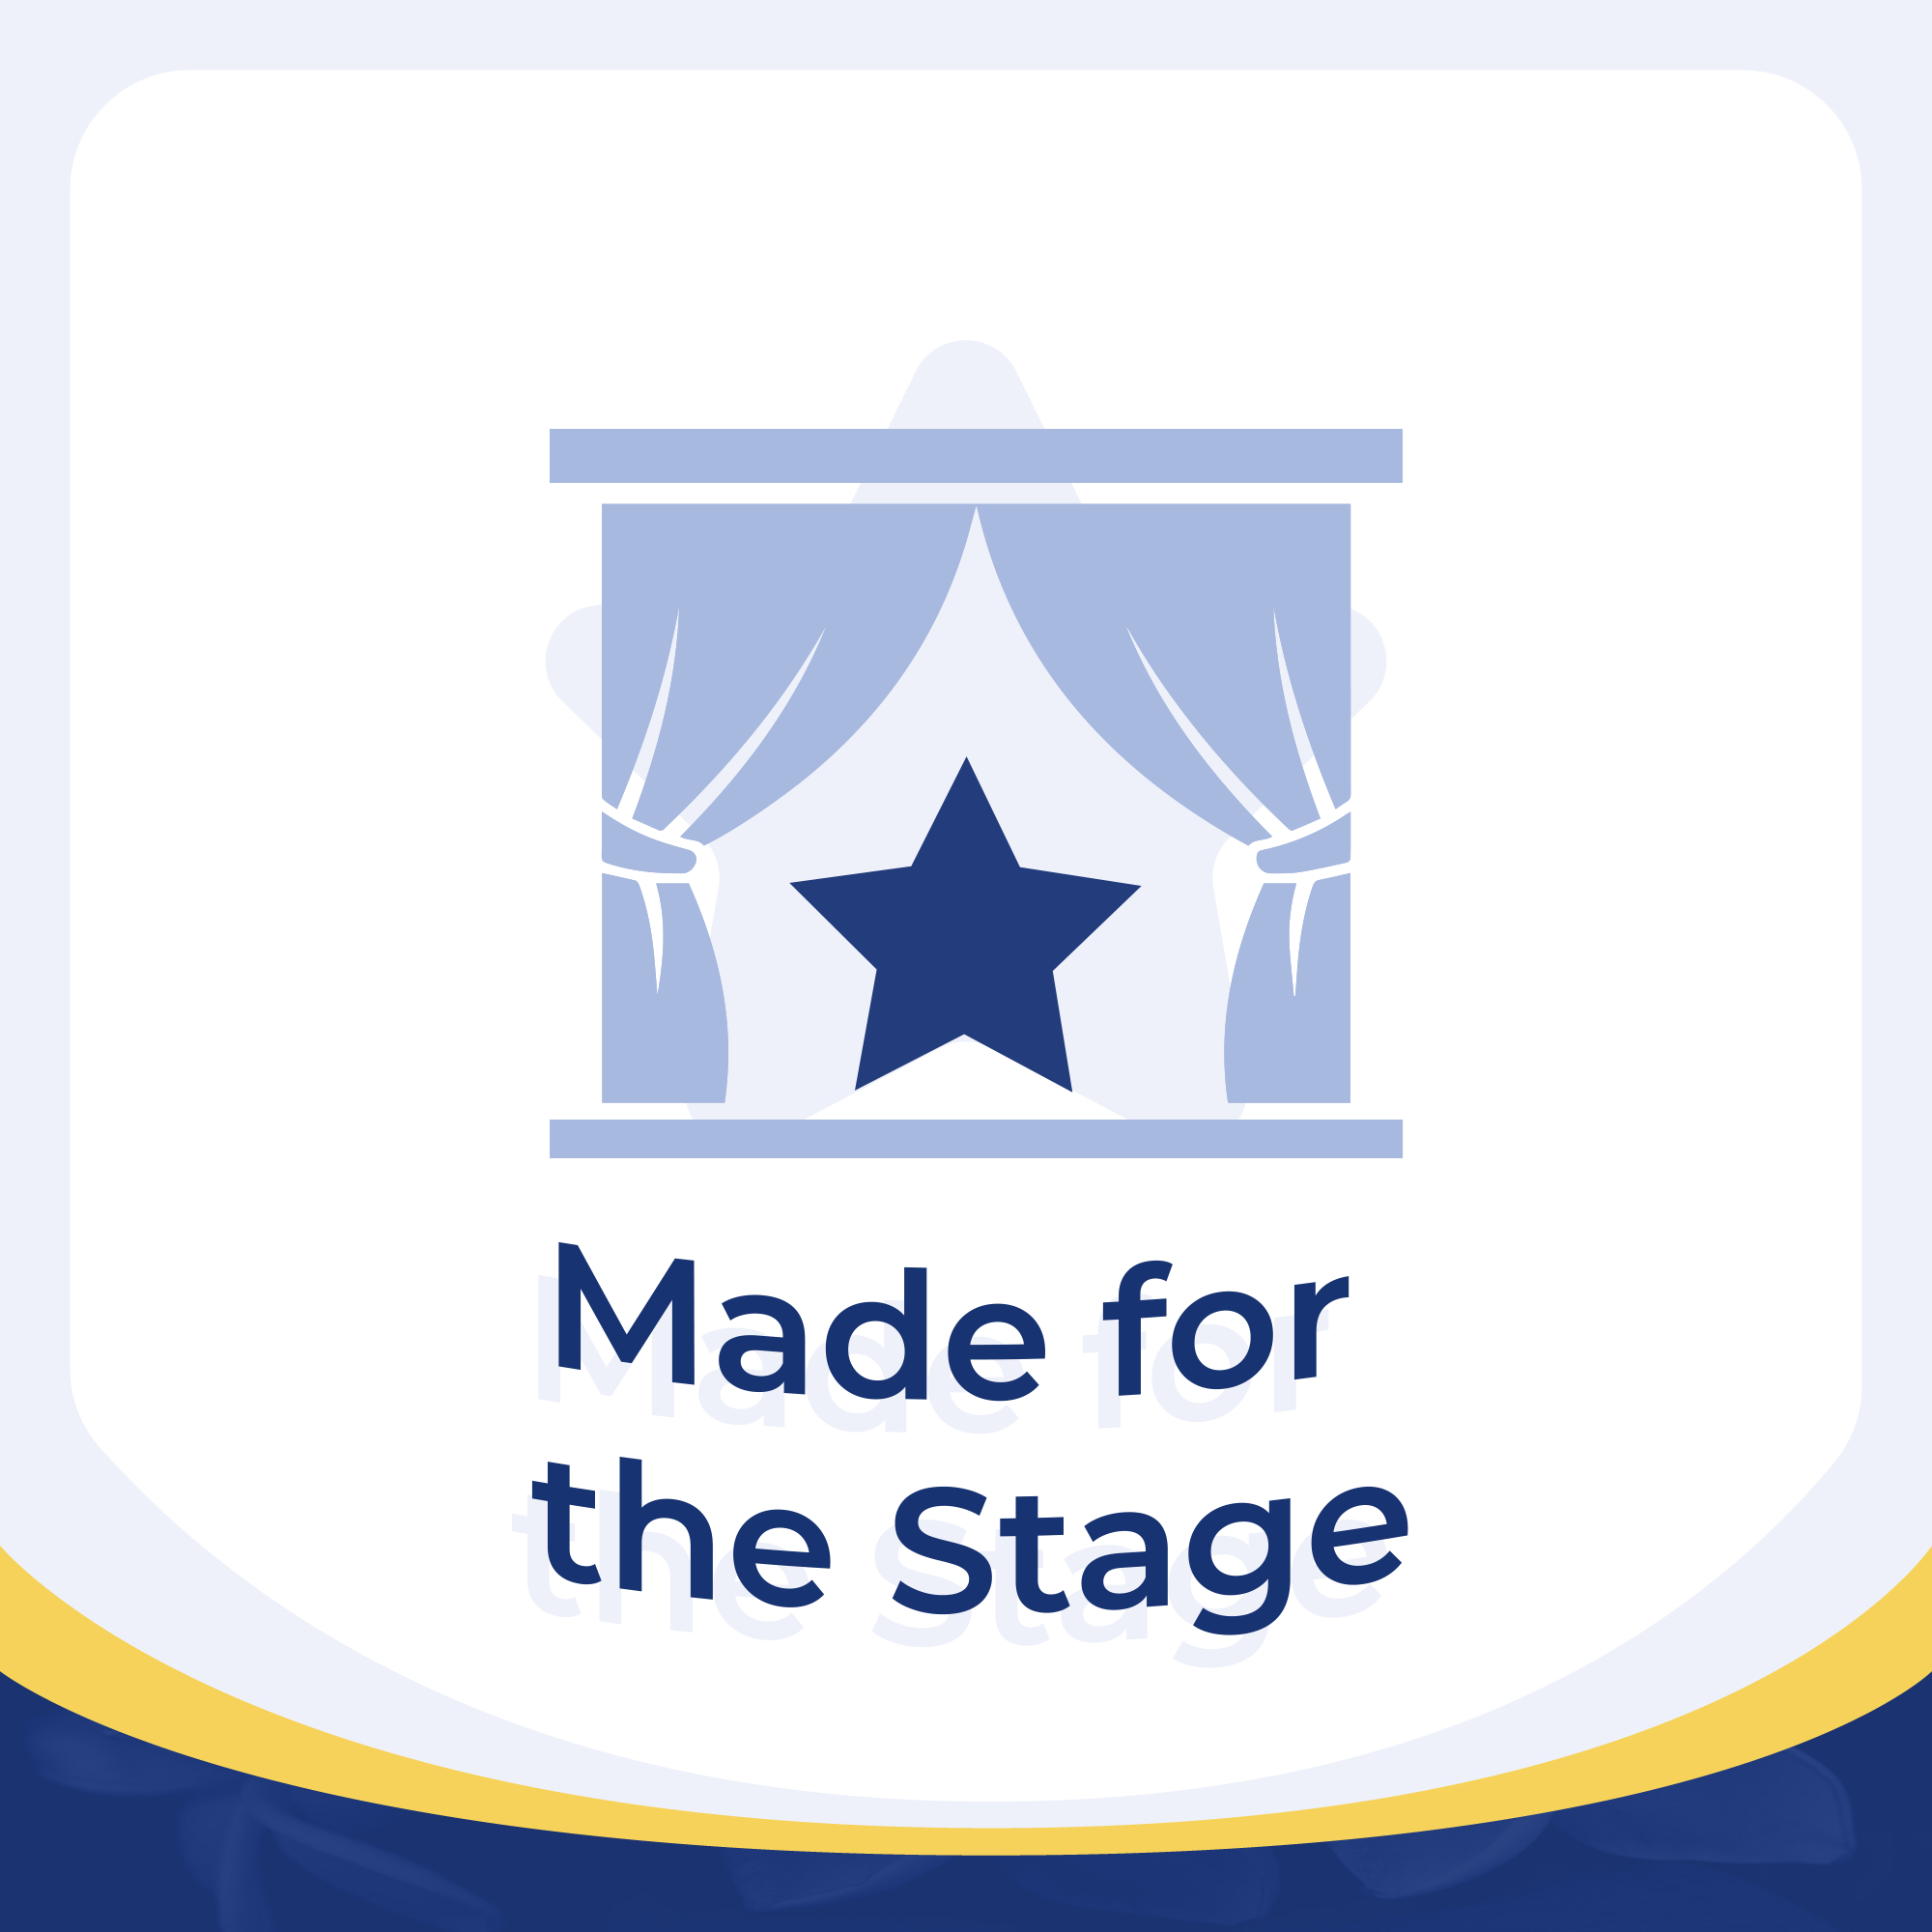 Made for the Stage